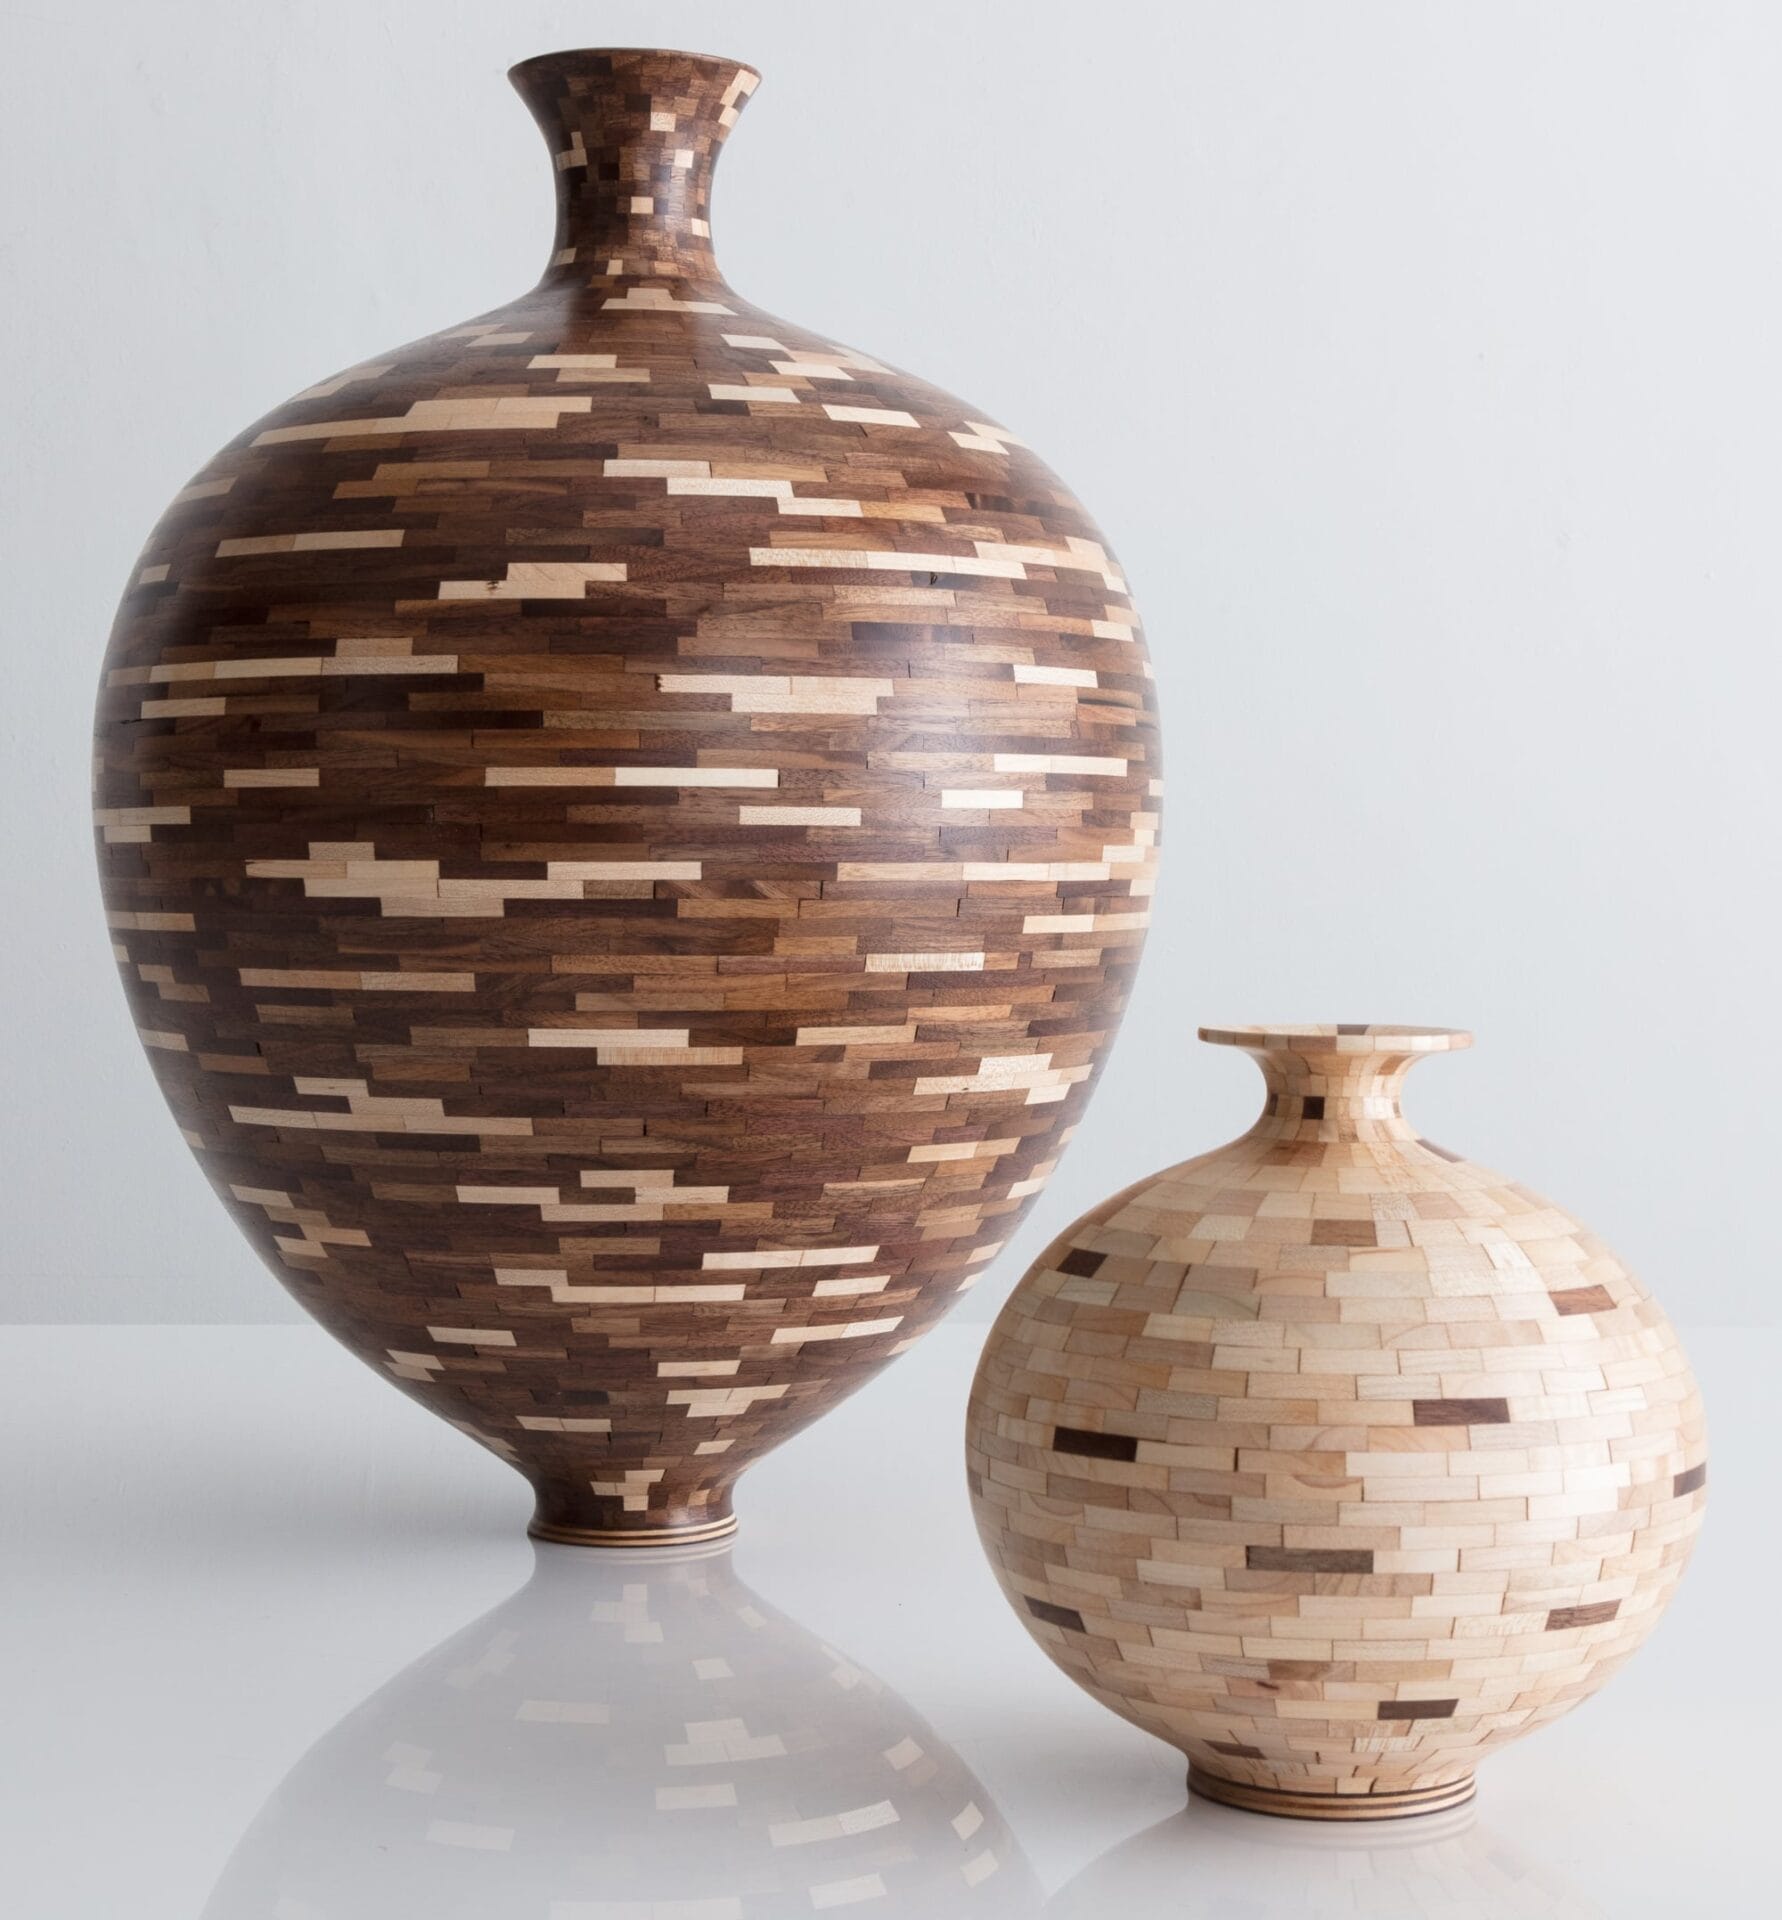 two curvy wooden vessels made of dark and light wood components fitted together, the left is tall and darker and the left is short and lighter